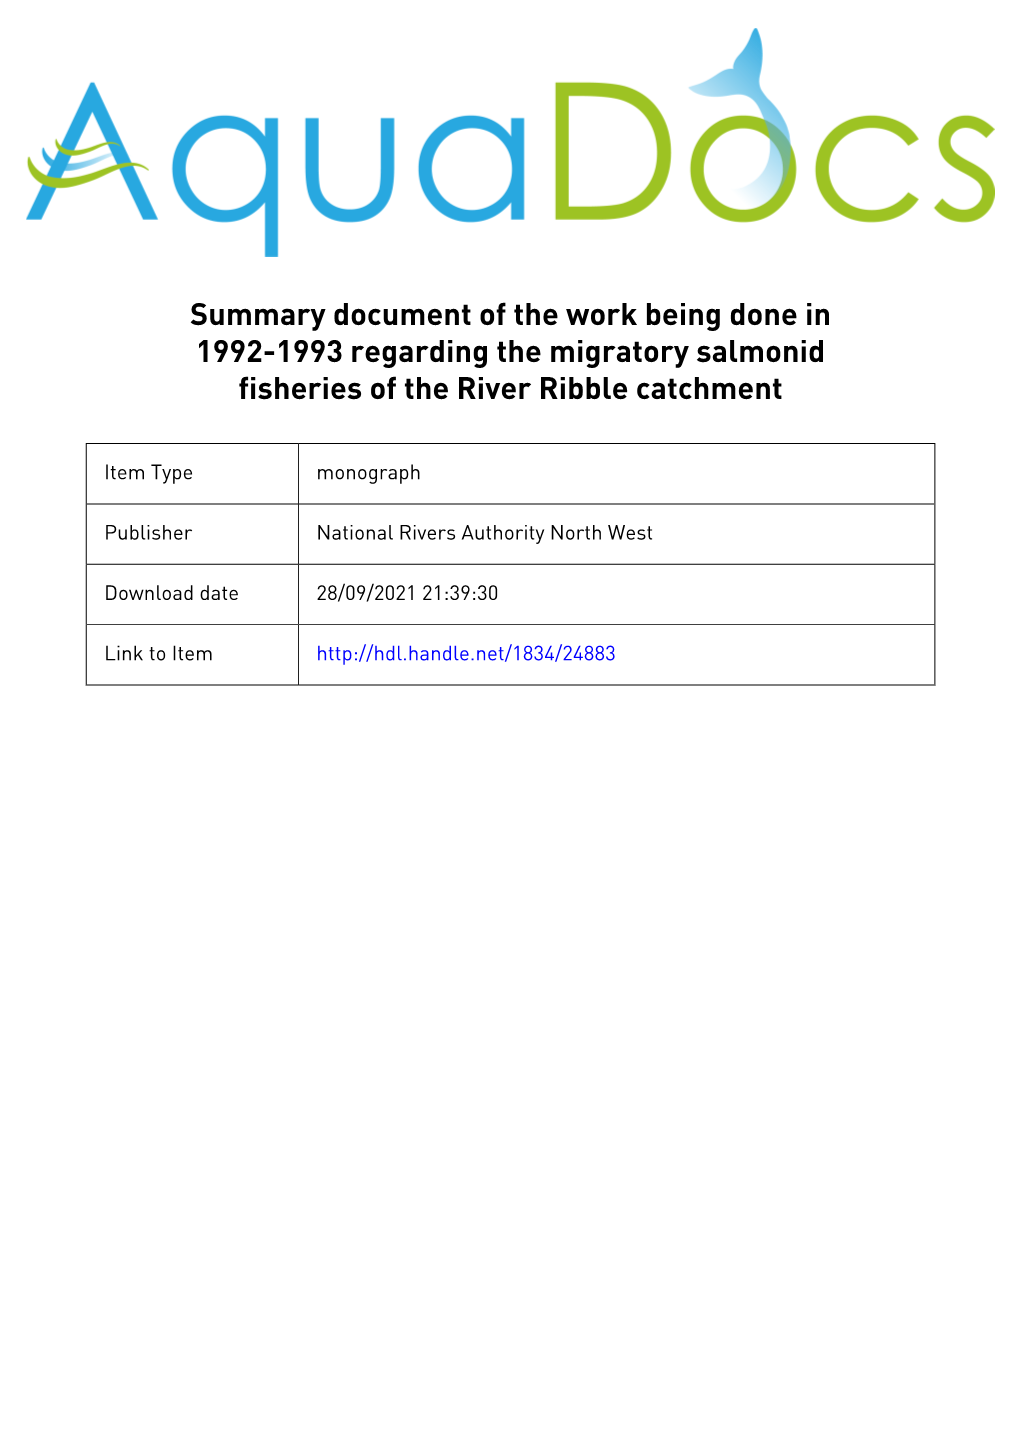 1. an Analysis of the Historical Catch Data from the Migratory Salmonid Fisheries of the River Ribble